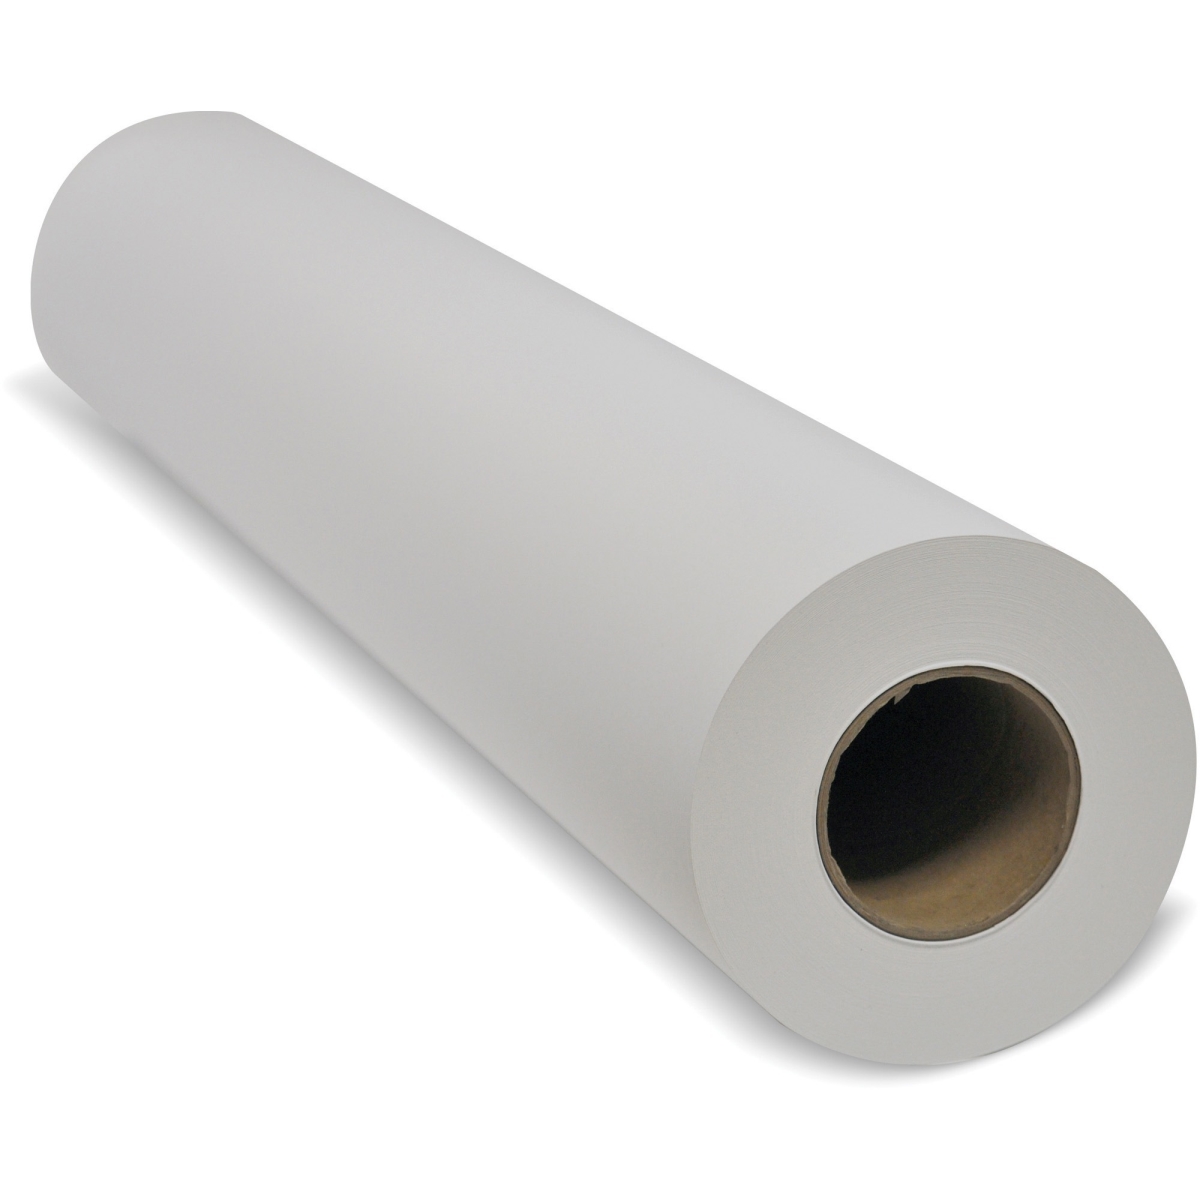 Iconex Icx90750205 Uncoated Wide Format Copy & Multipurpose Paper Roll, White